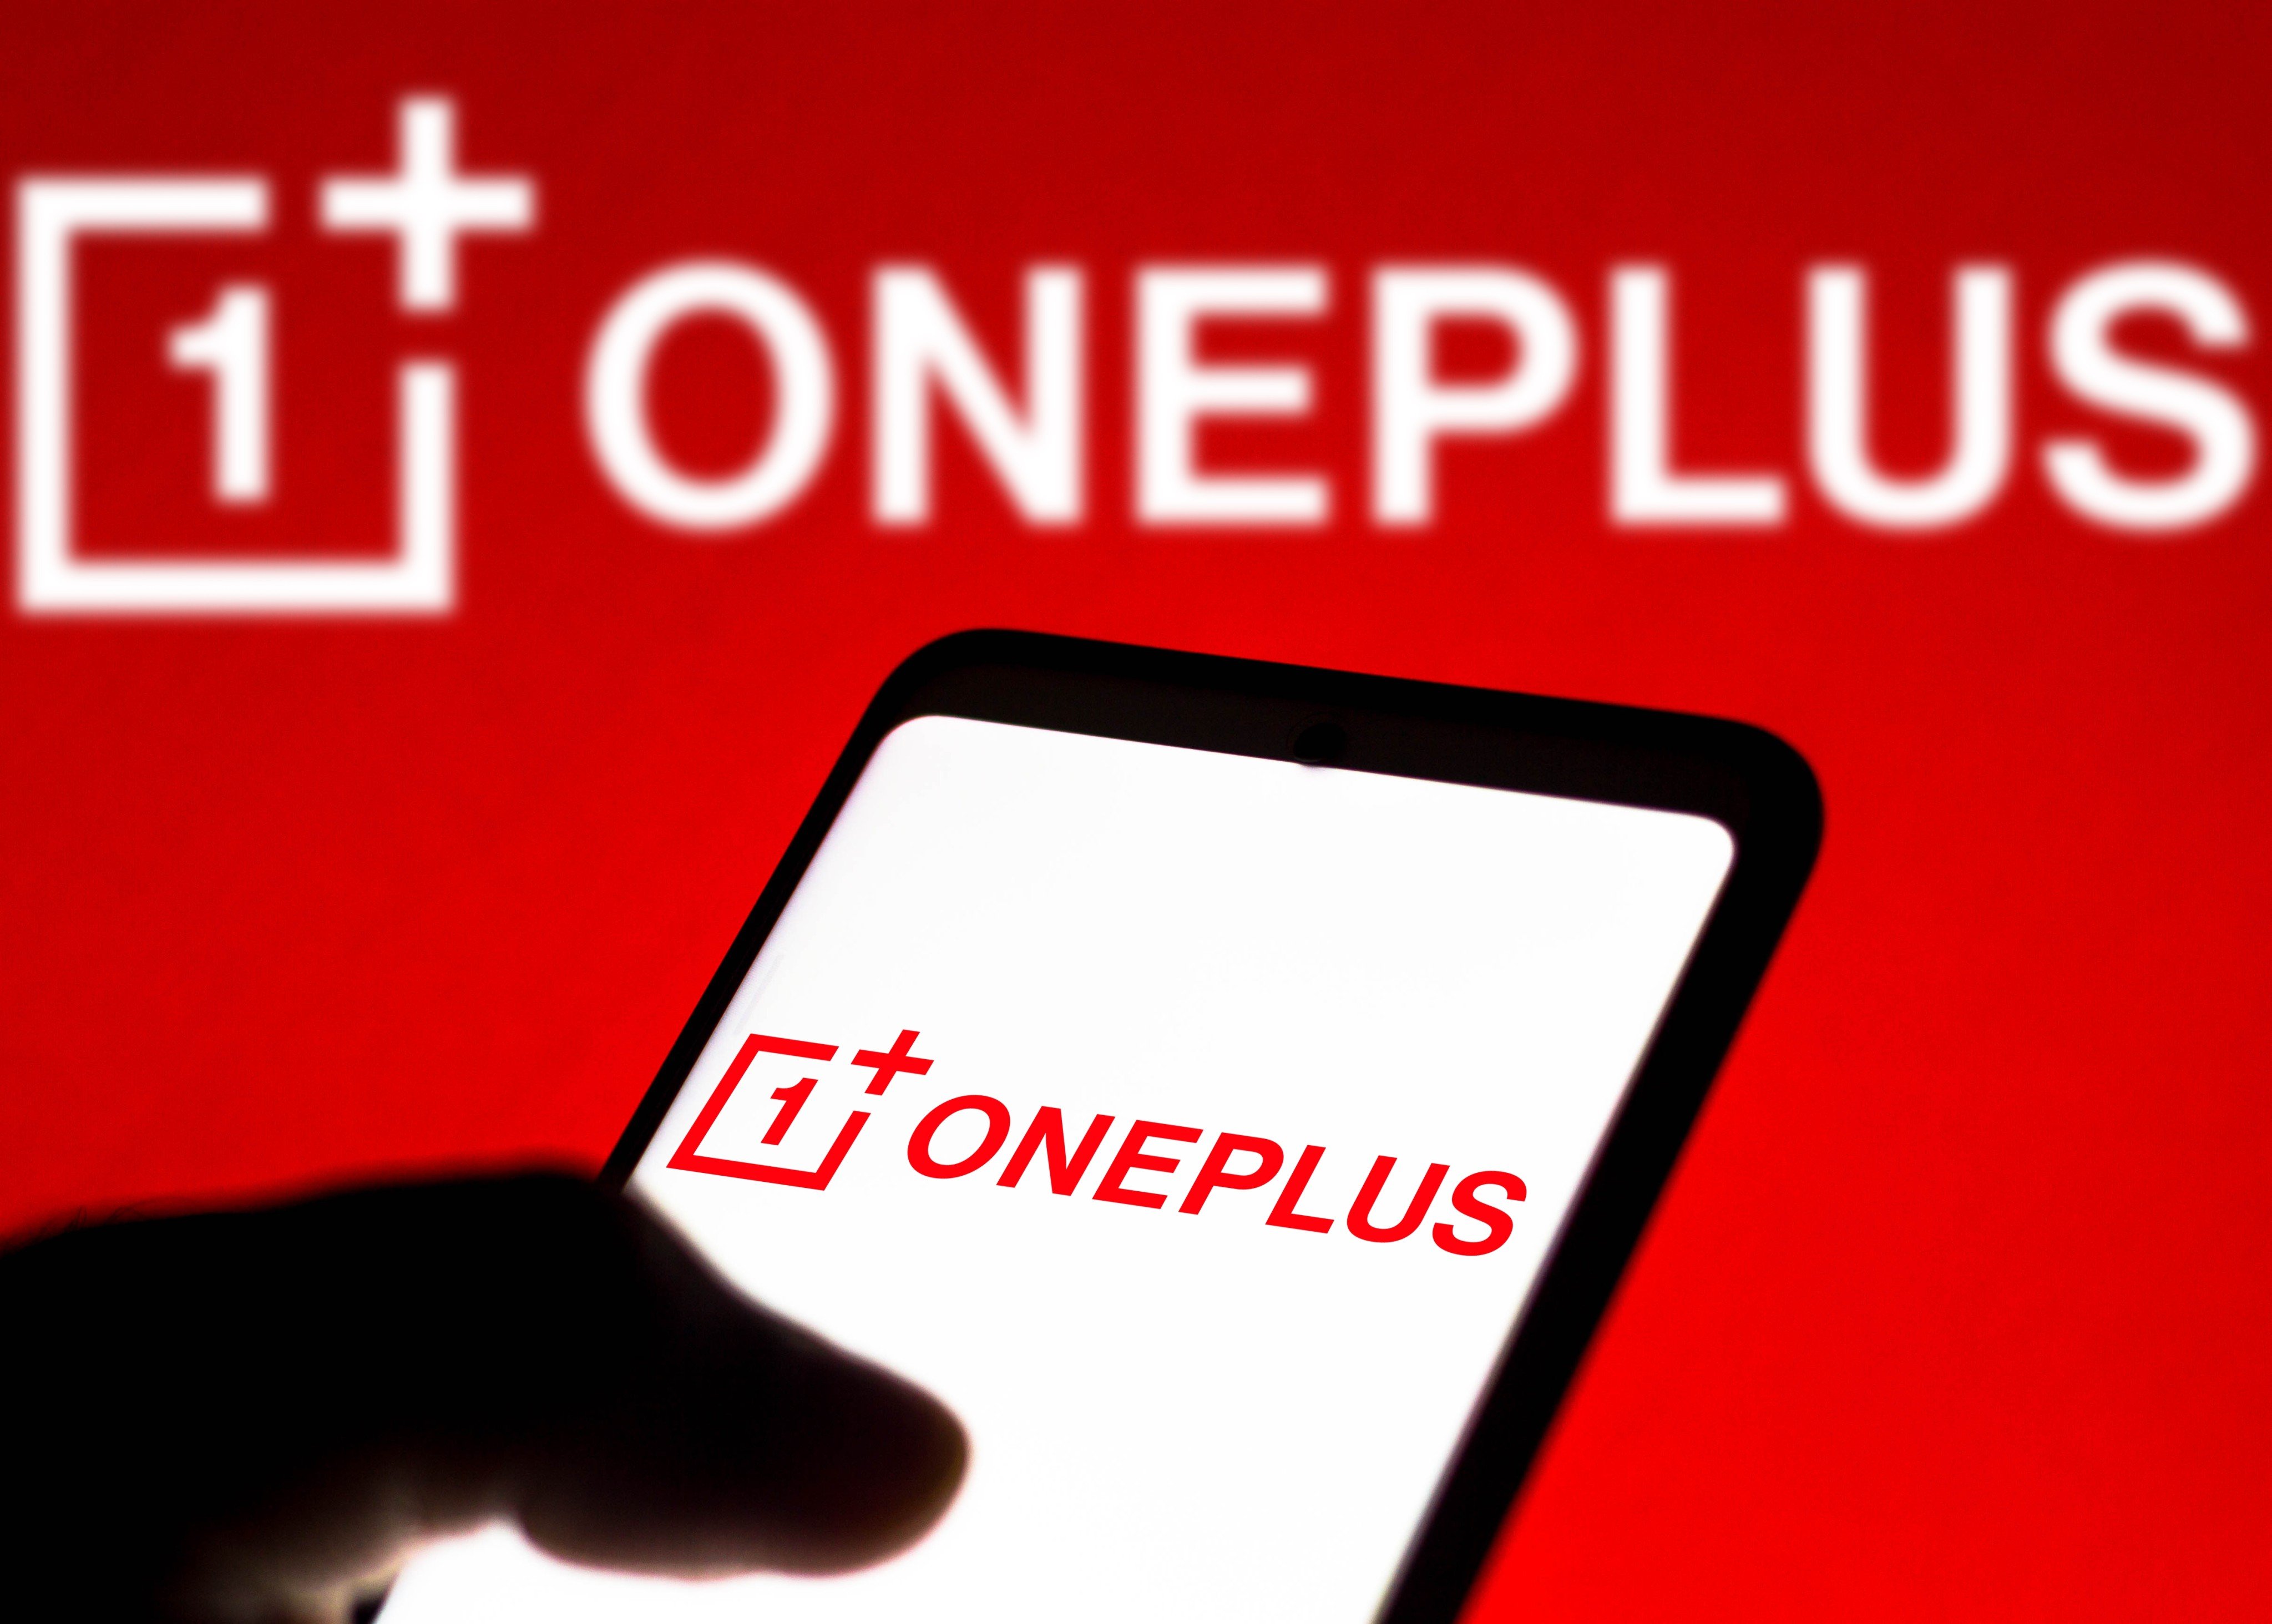 OnePlus is facing troubles in India, one of its most important markets. Photo: Shutterstock